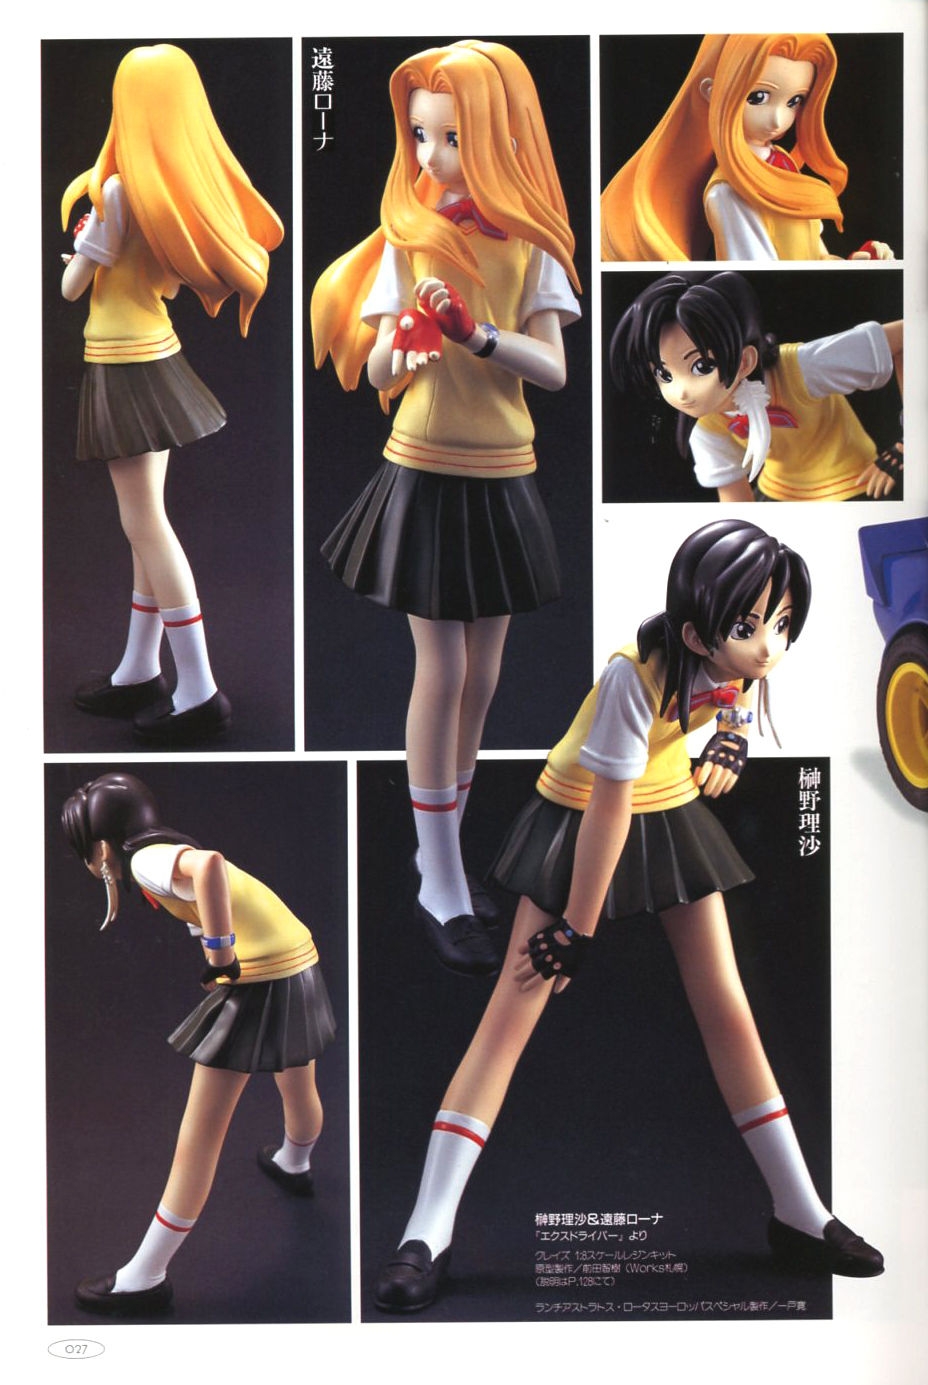 Hobby Japan Mook All That Figure 2001 21